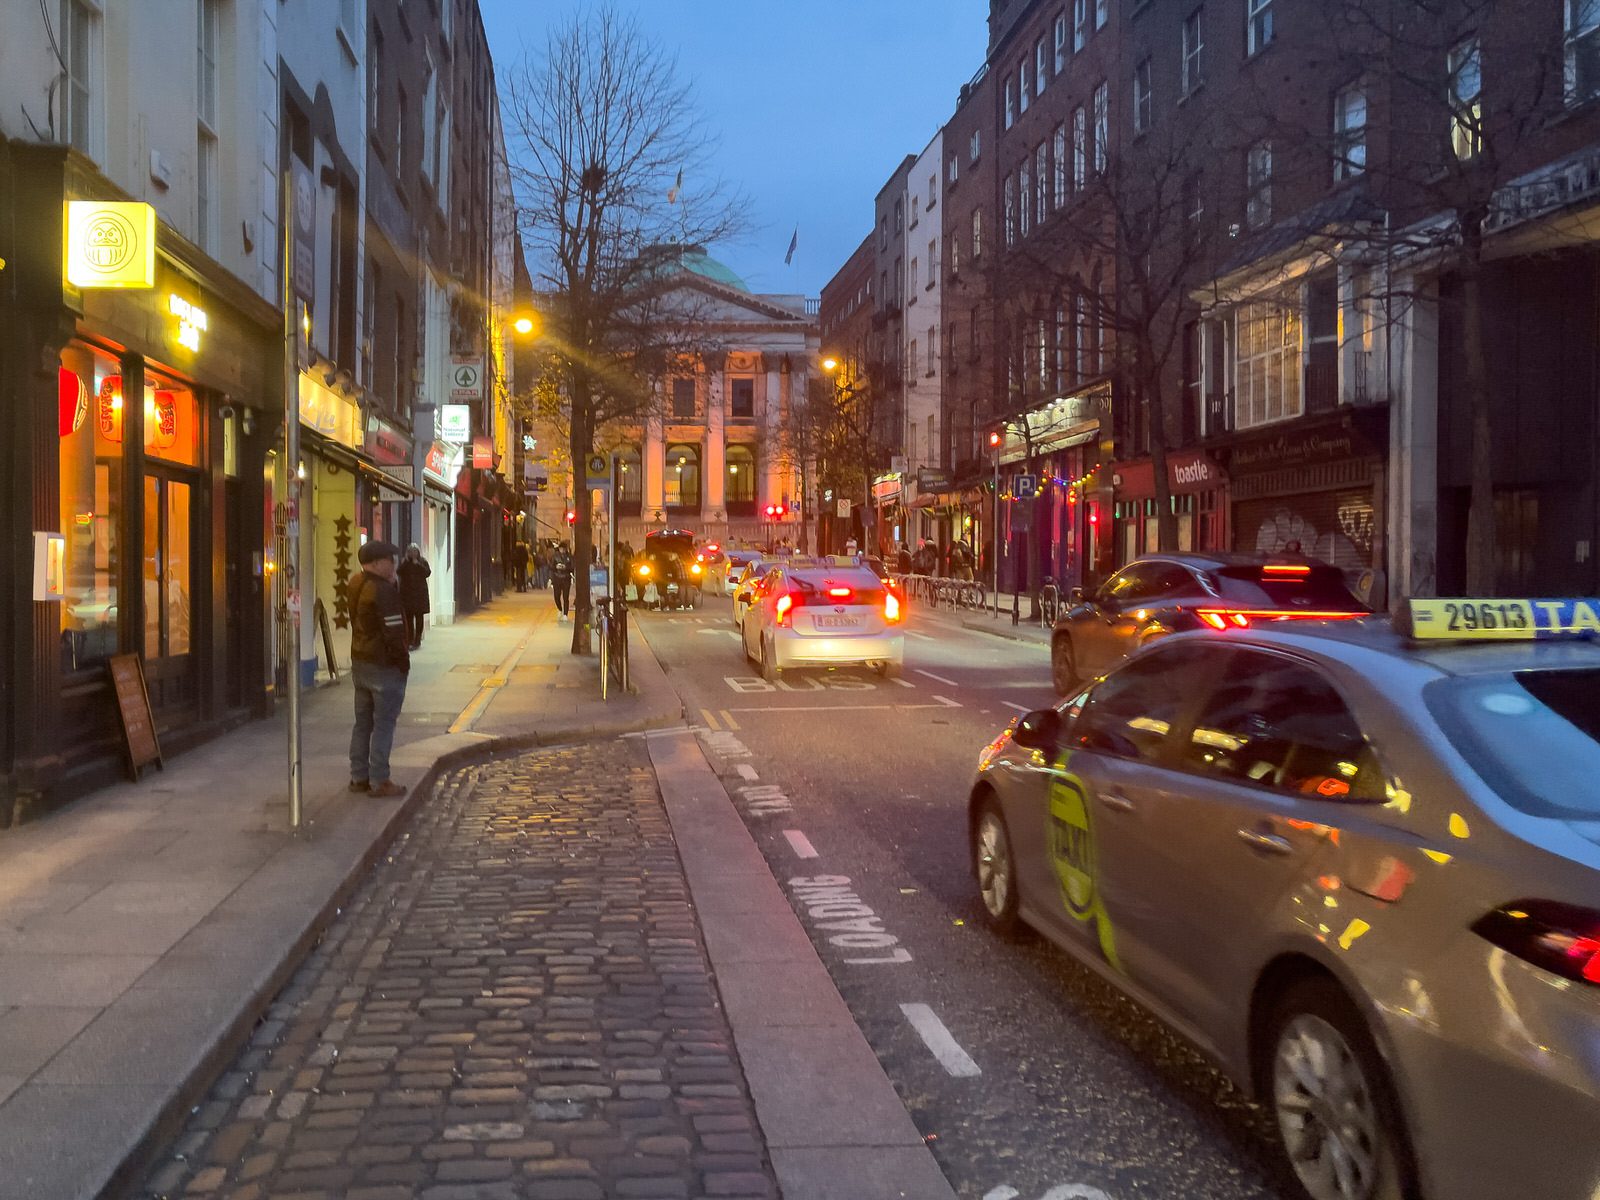 I VISITED TEMPLE BAR TODAY [AS NIGHTFALL WAS APPROACHING]-225373-1